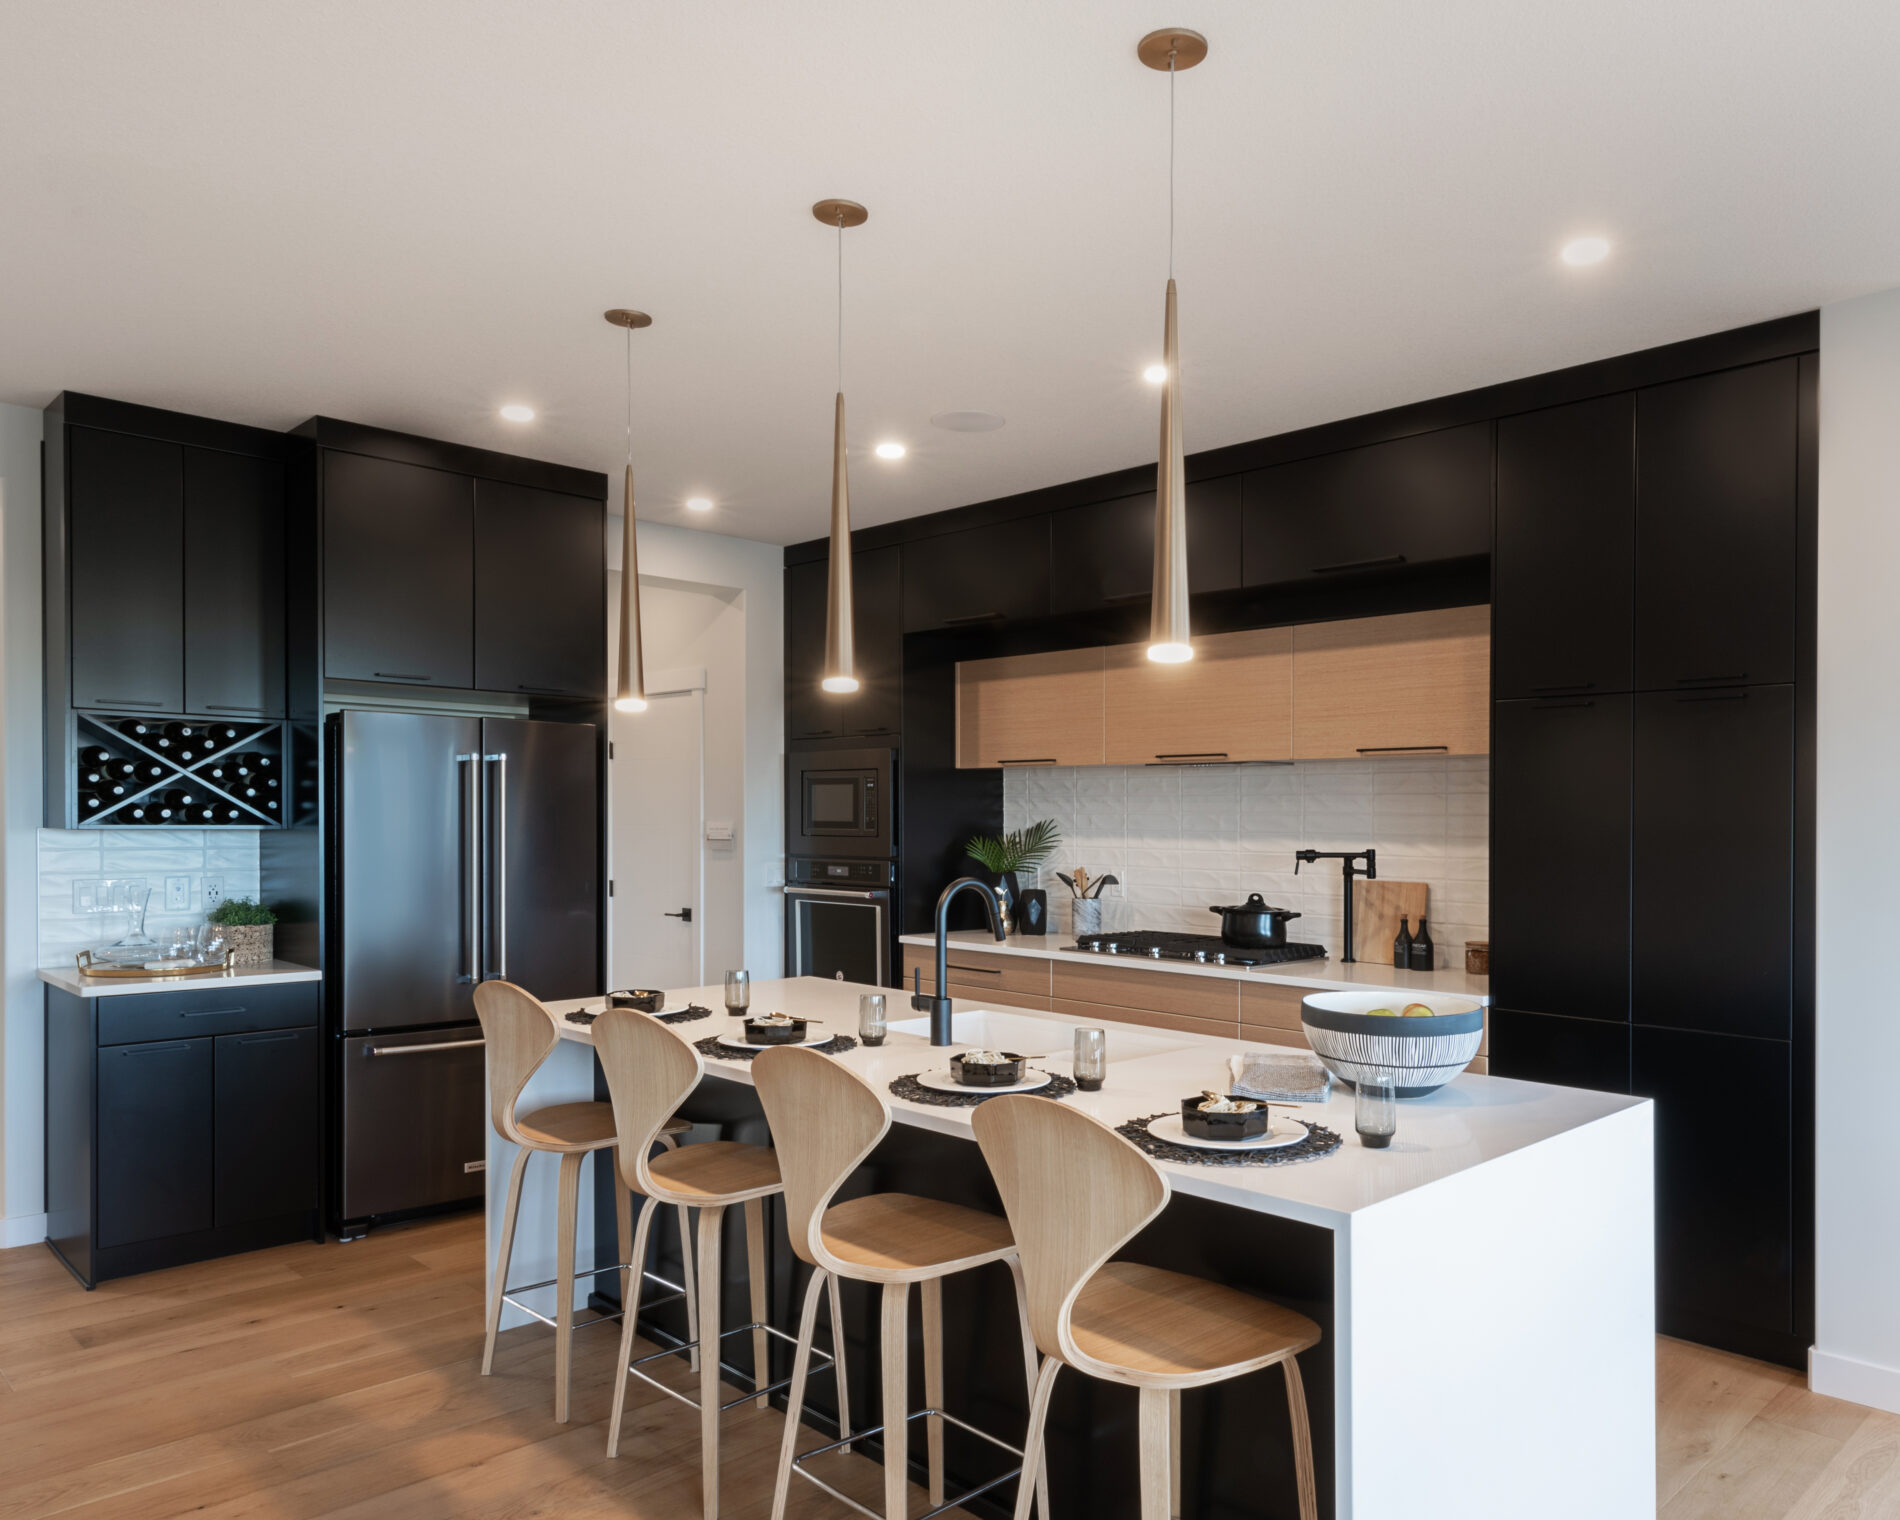 Two-toned, colour blocked, black and wood kitchen with white waterfall countertops on island